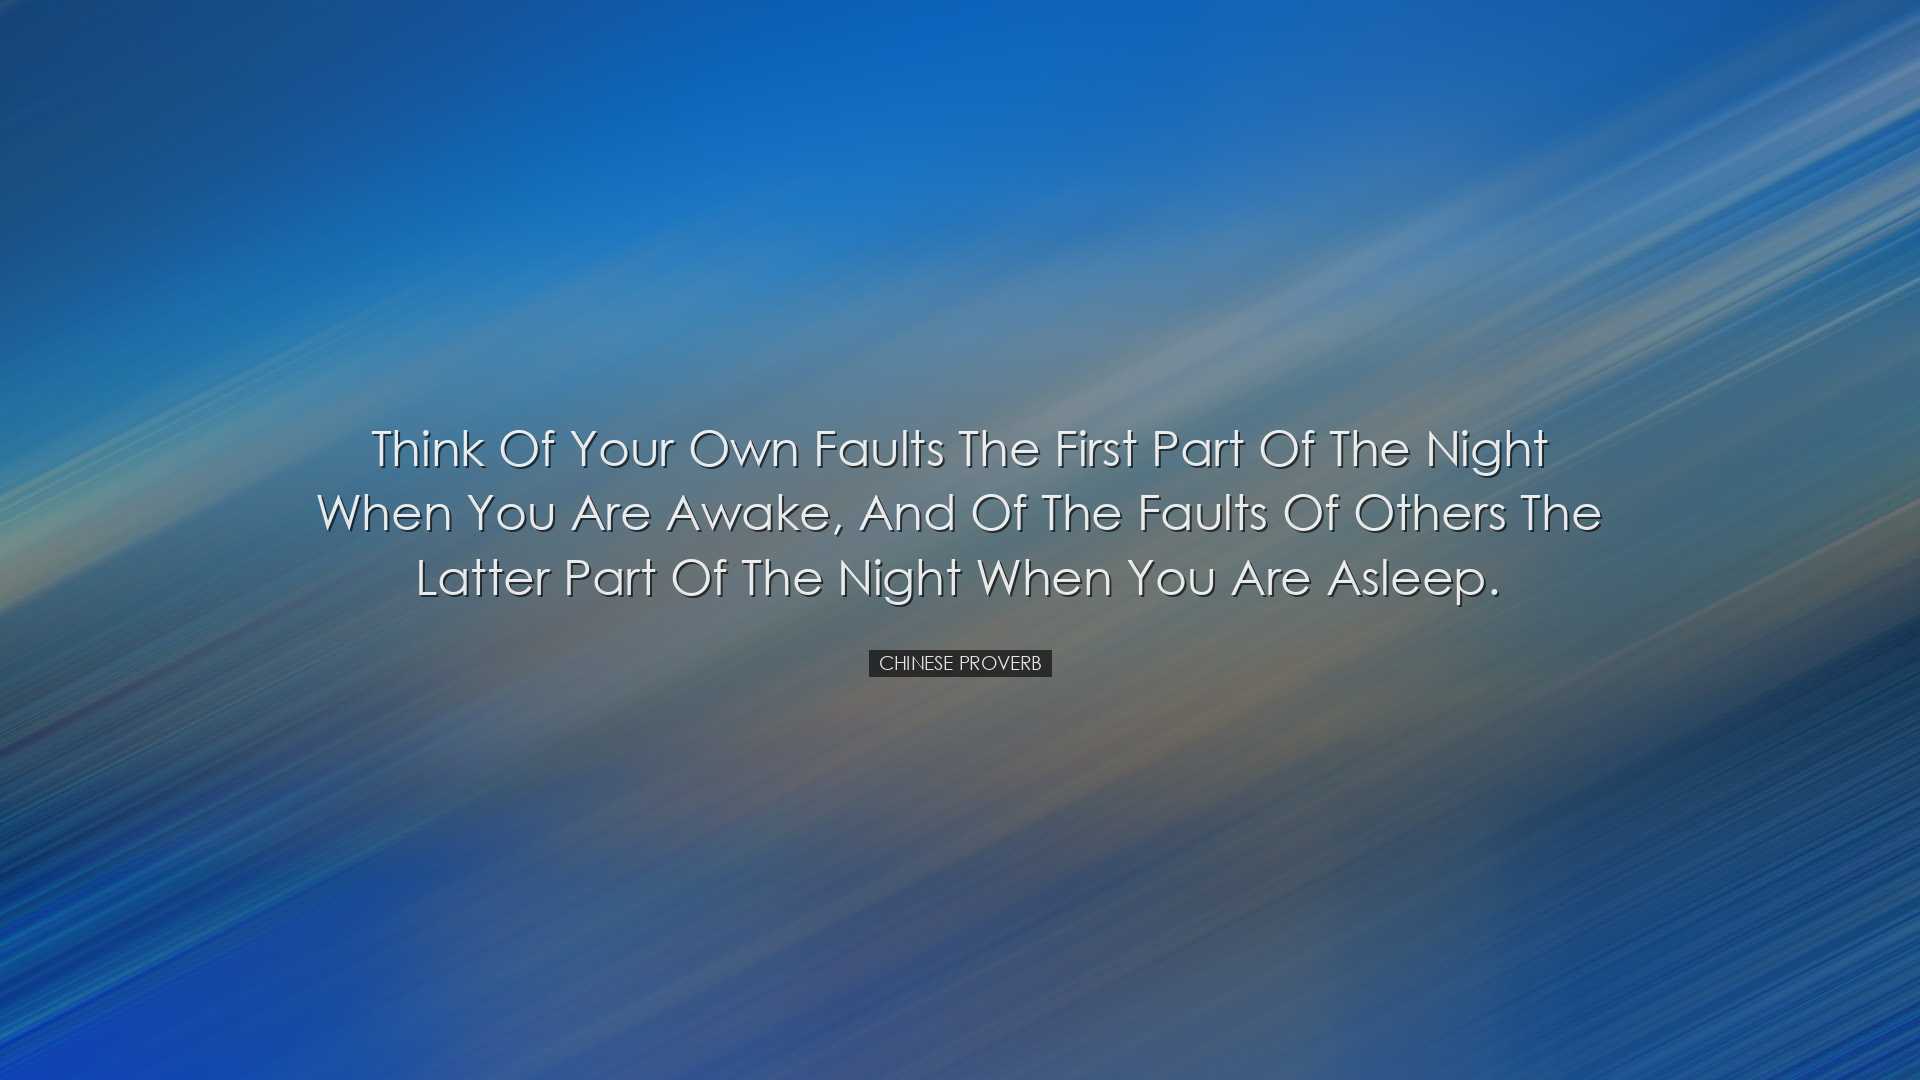 Think of your own faults the first part of the night when you are